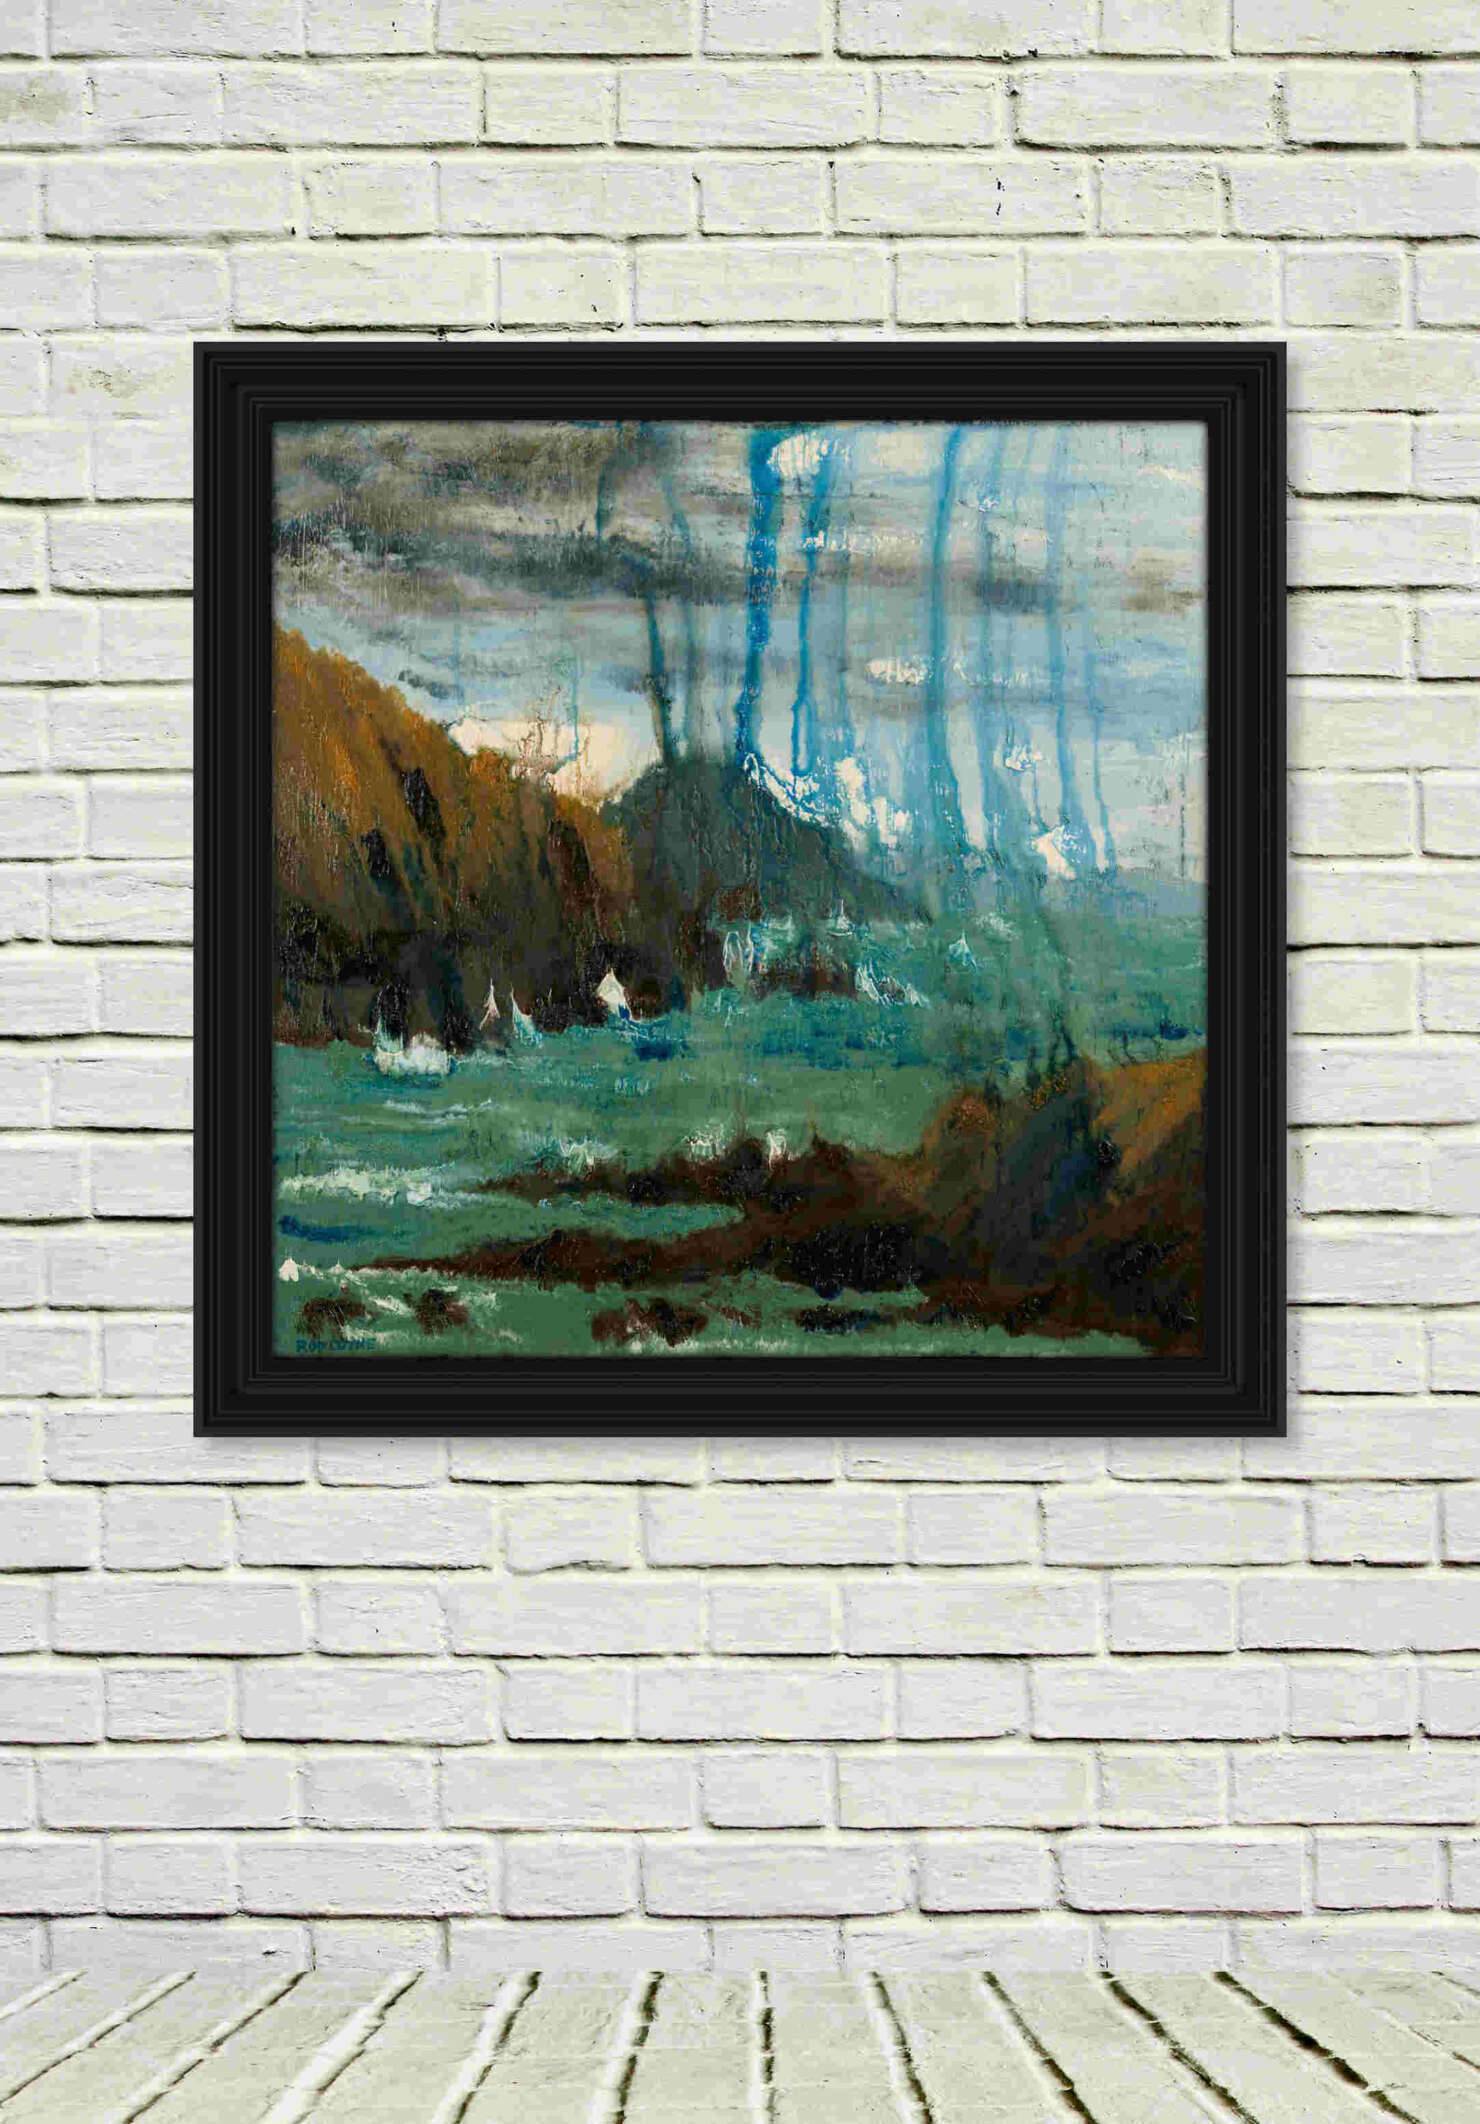 artist rod coyne's seascape "Horse Islands" is shown here, in a black frame on a white wall.